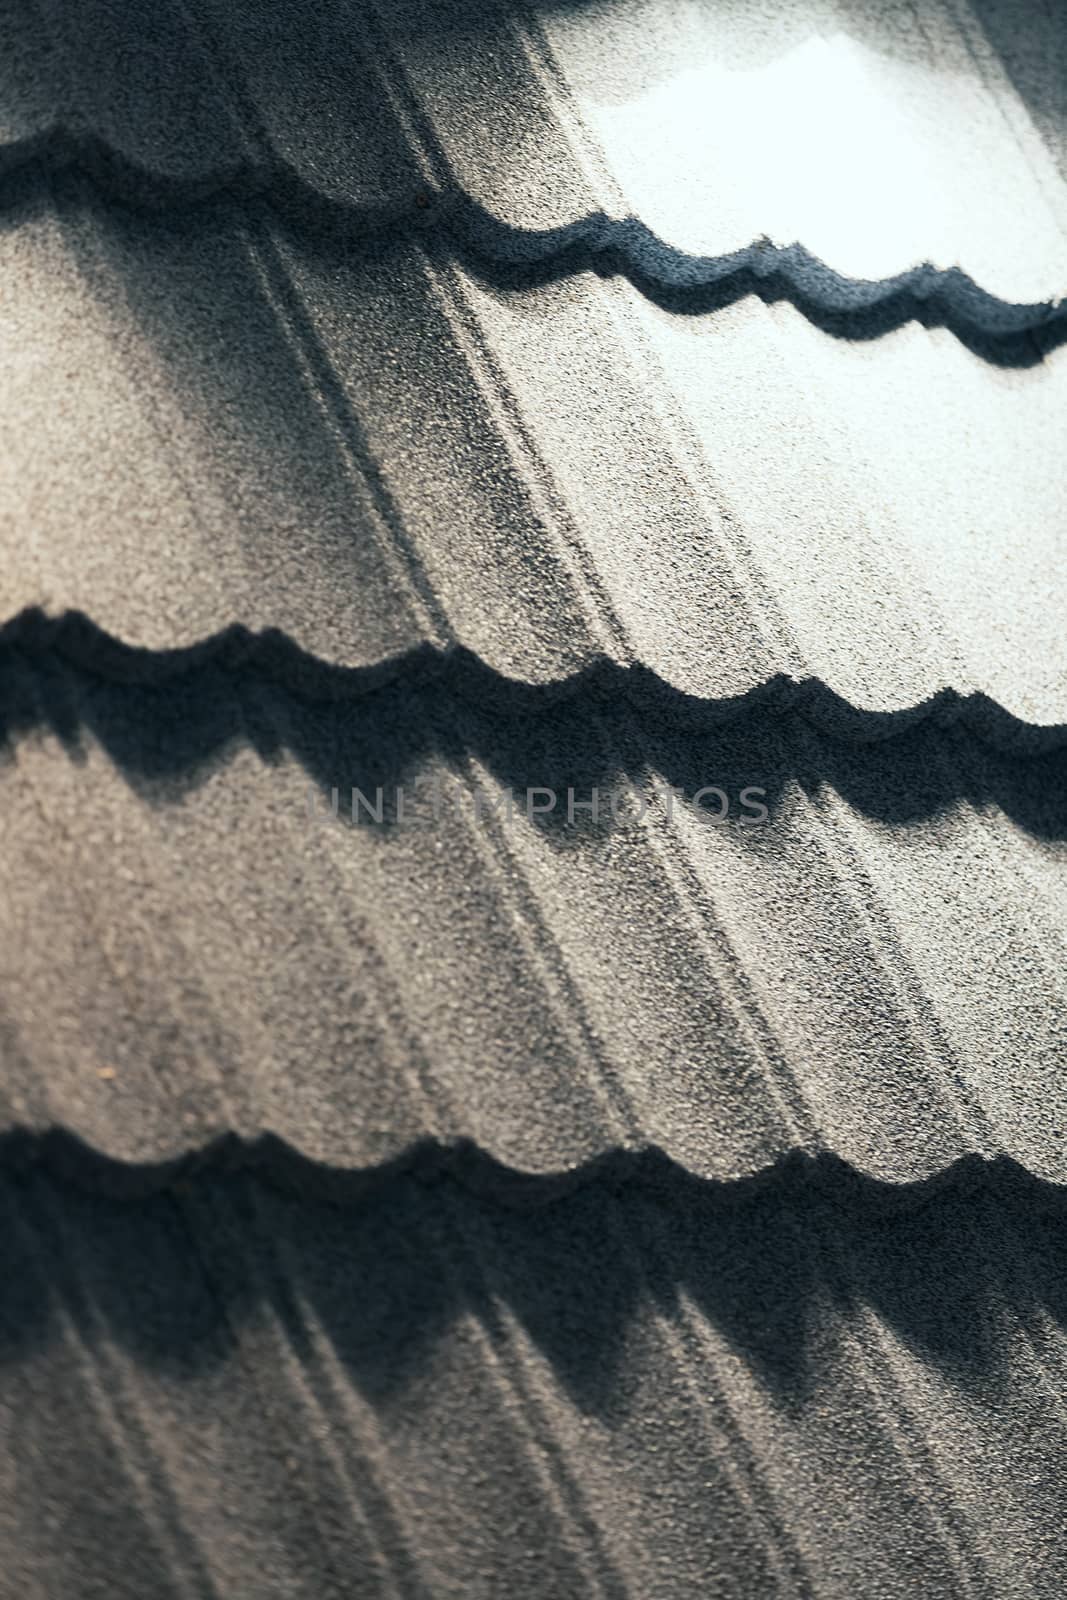 black roof tiles to cover the house, note shallow depth of field